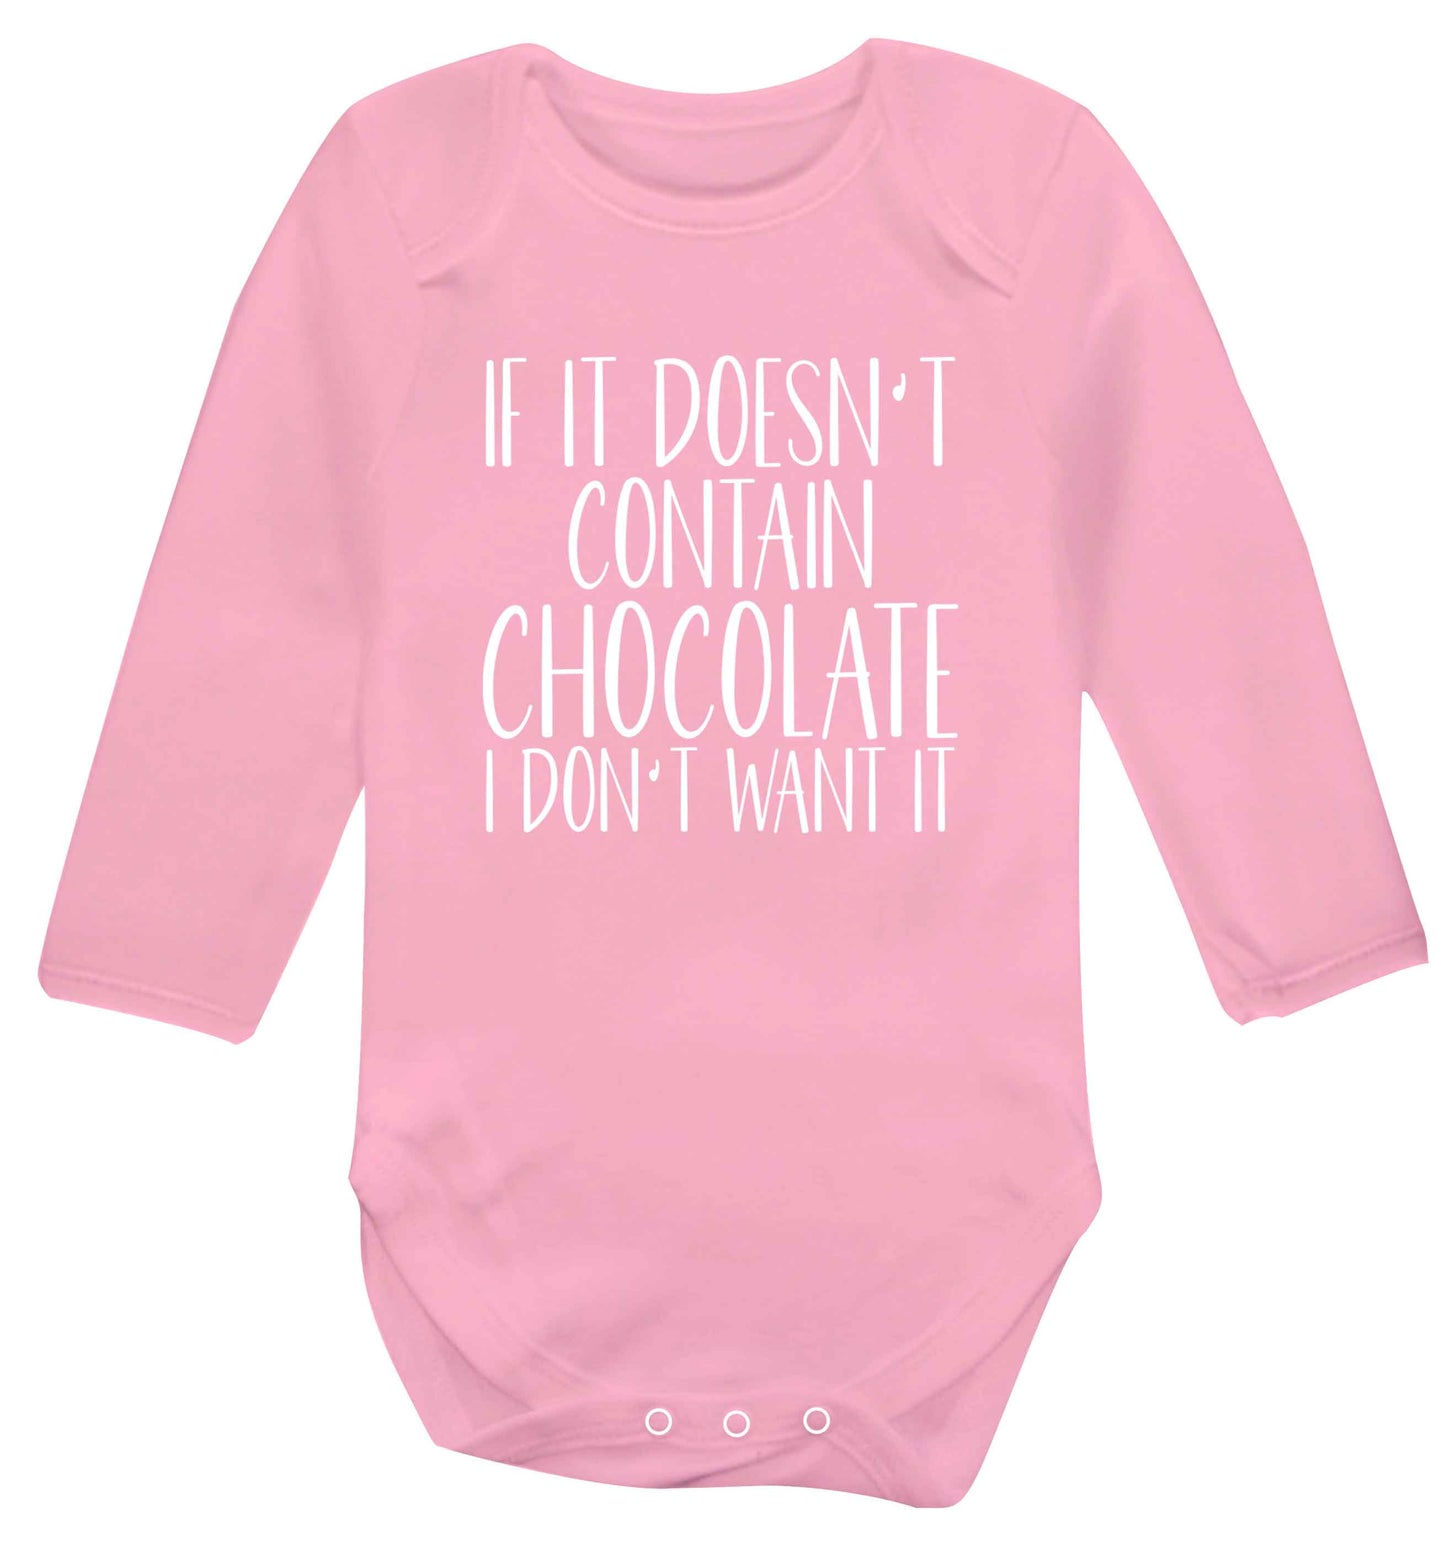 If it doesn't contain chocolate I don't want it baby vest long sleeved pale pink 6-12 months